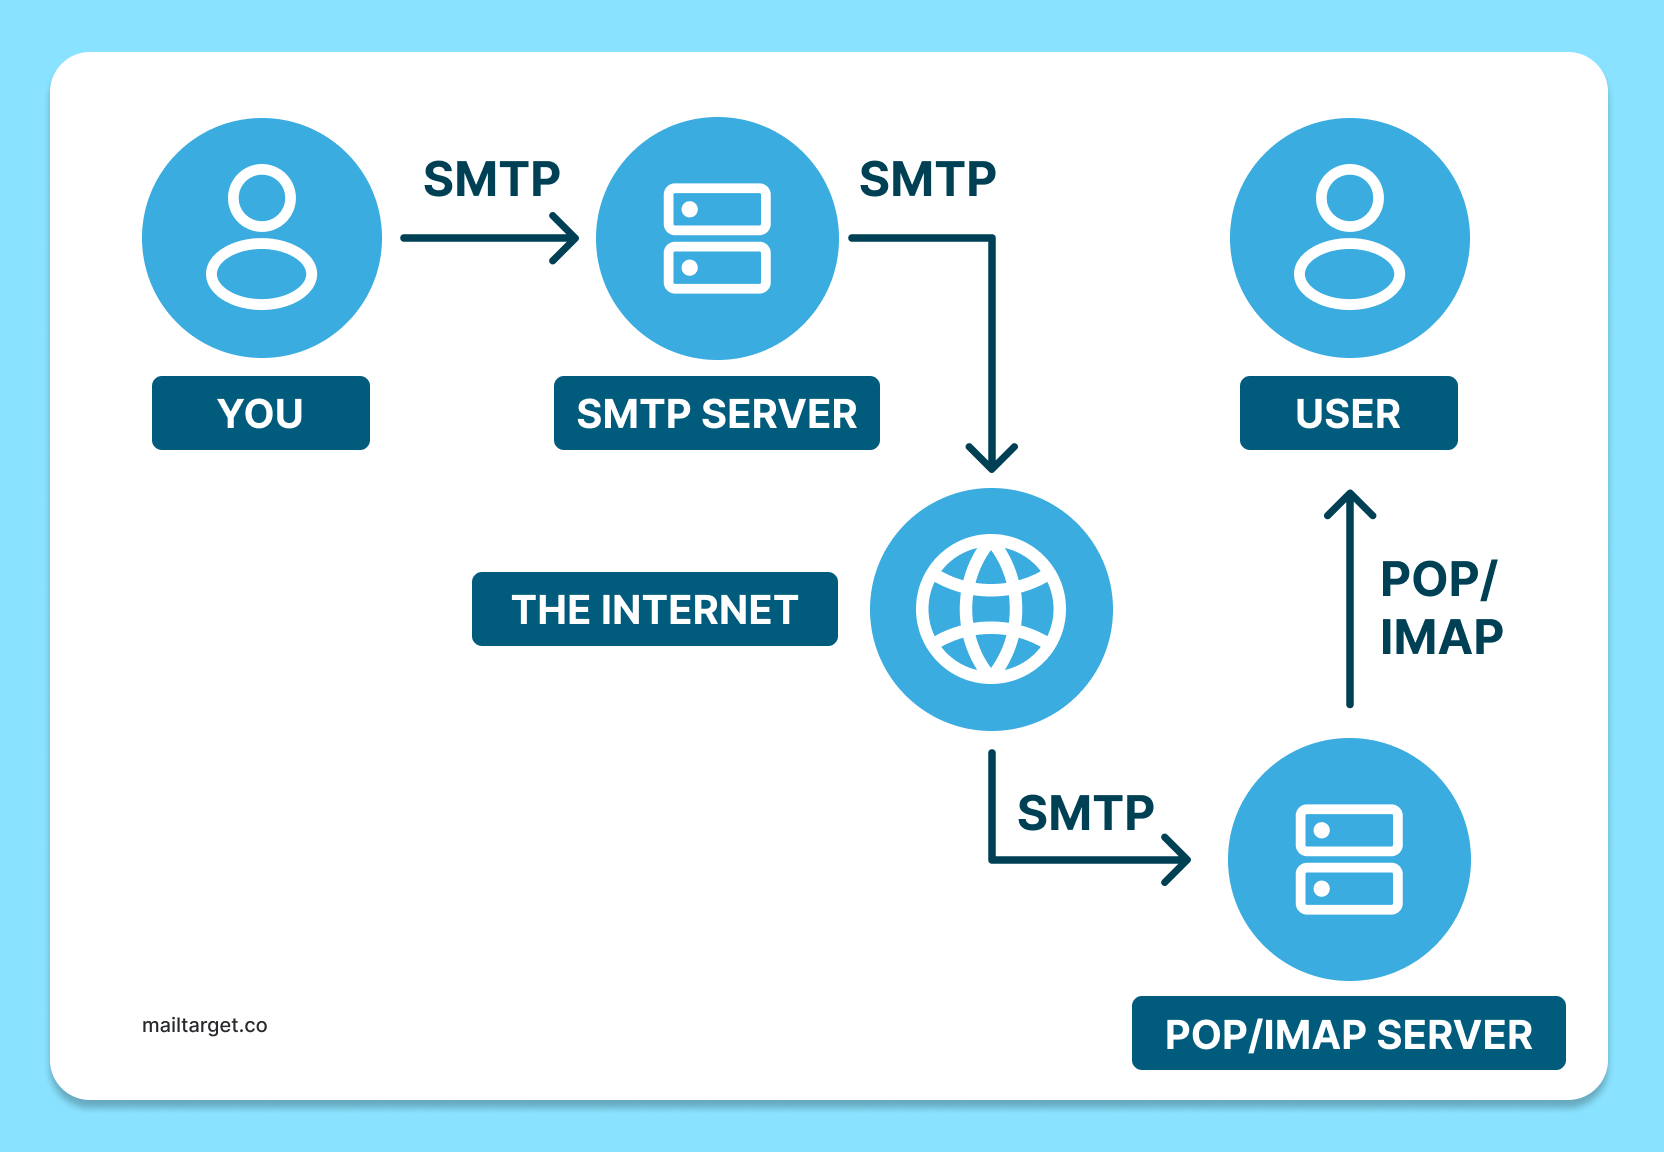 A simplified overview of how SMTP works